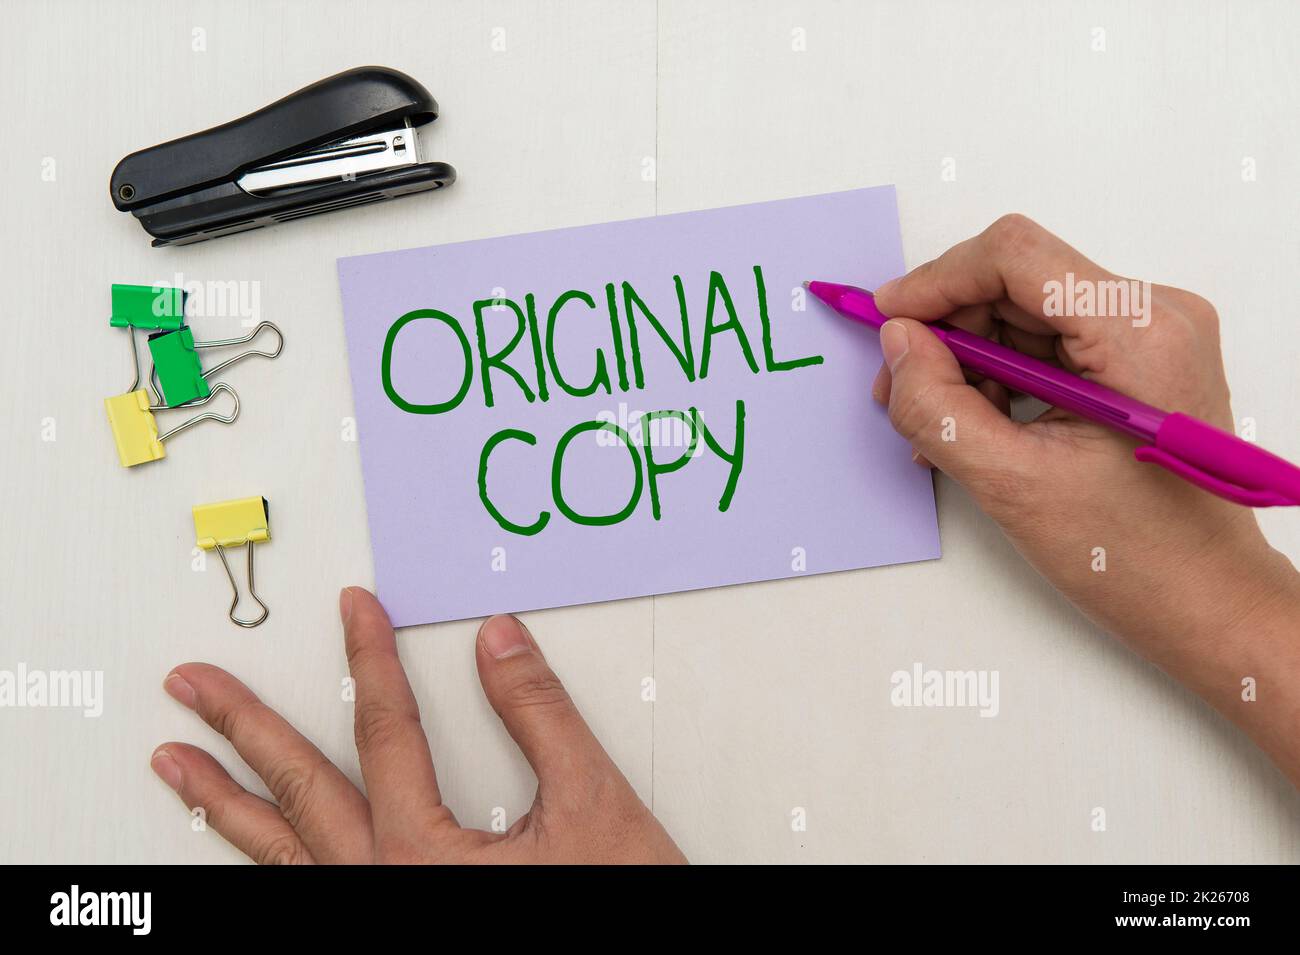 Text sign showing Original Copy. Conceptual photo Main Script Unprinted Branded Patented Master List Flashy School Office Supplies, Teaching Learning Collections, Writing Tools Stock Photo